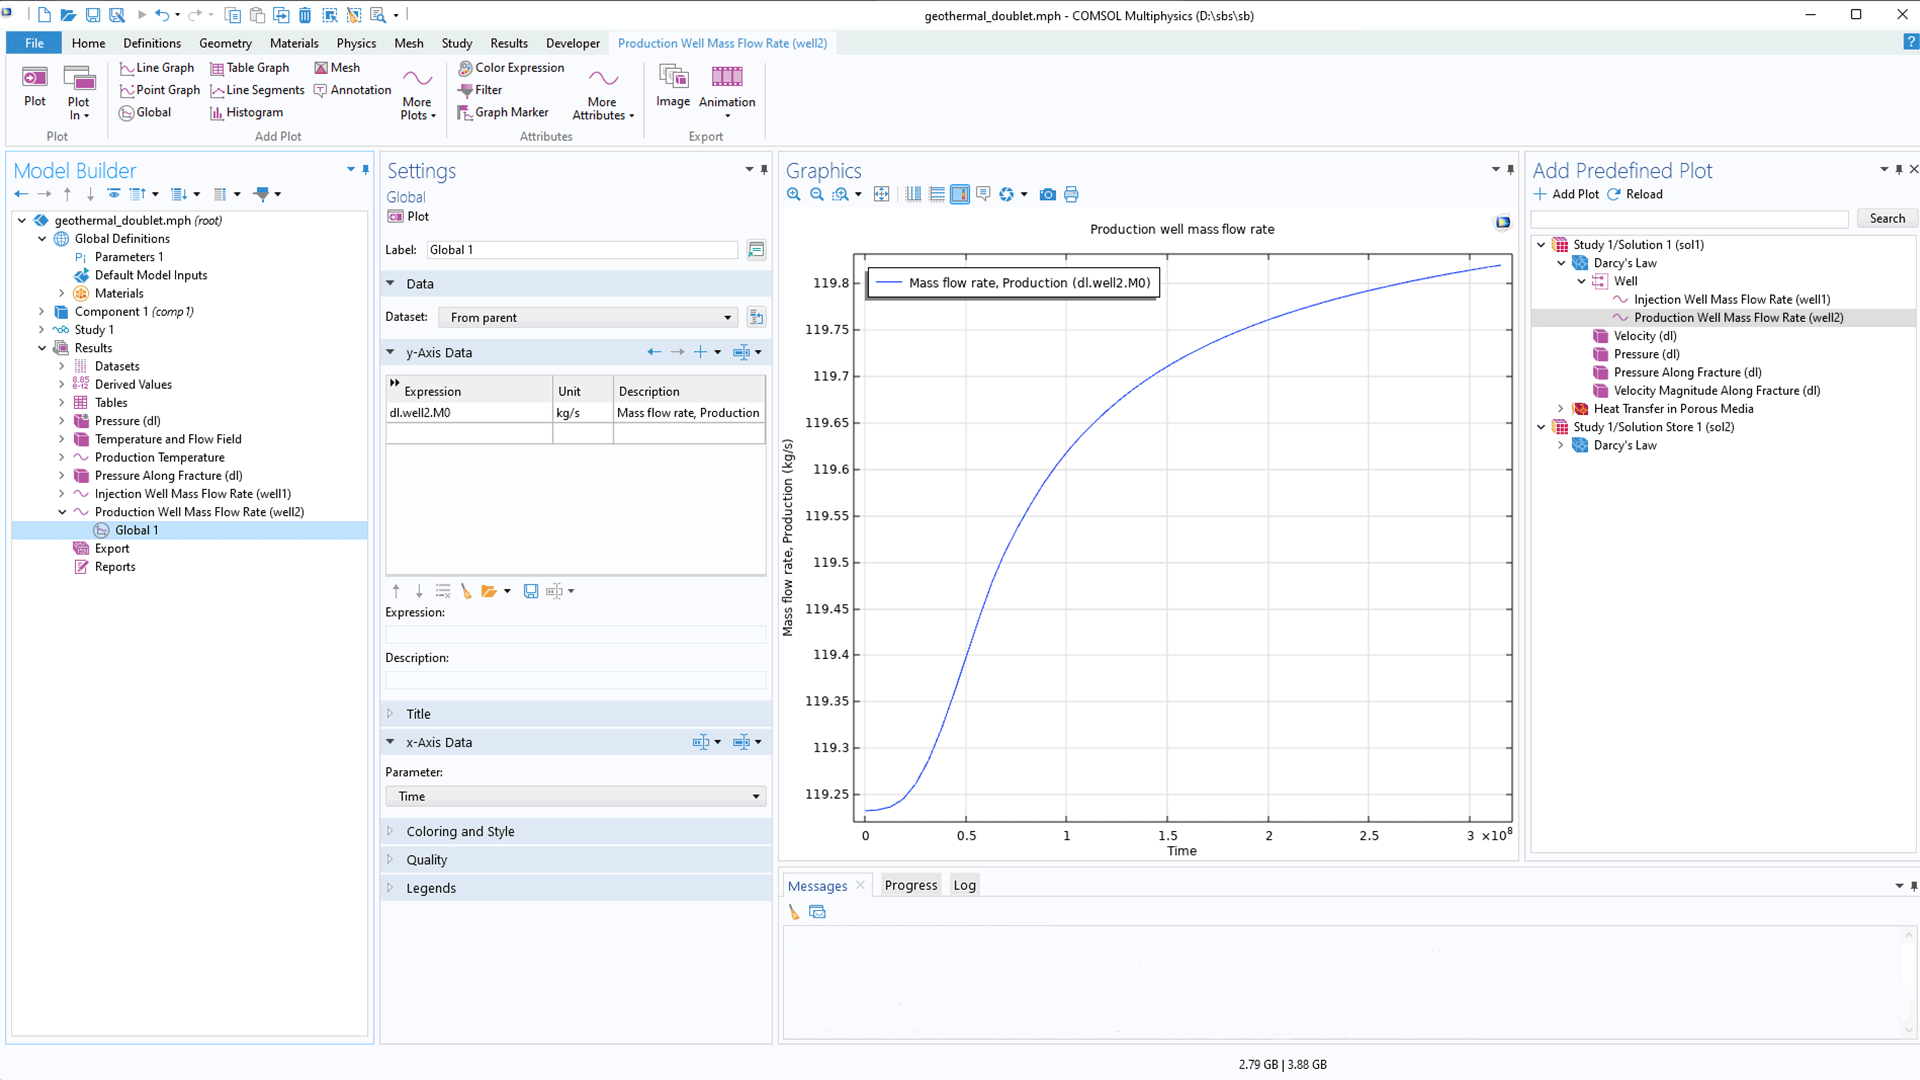 The COMSOL Multiphysics UI showing the Model Builder with the Global node highlighted, the corresponding Settings window, and a 1D plot in the Graphics window.